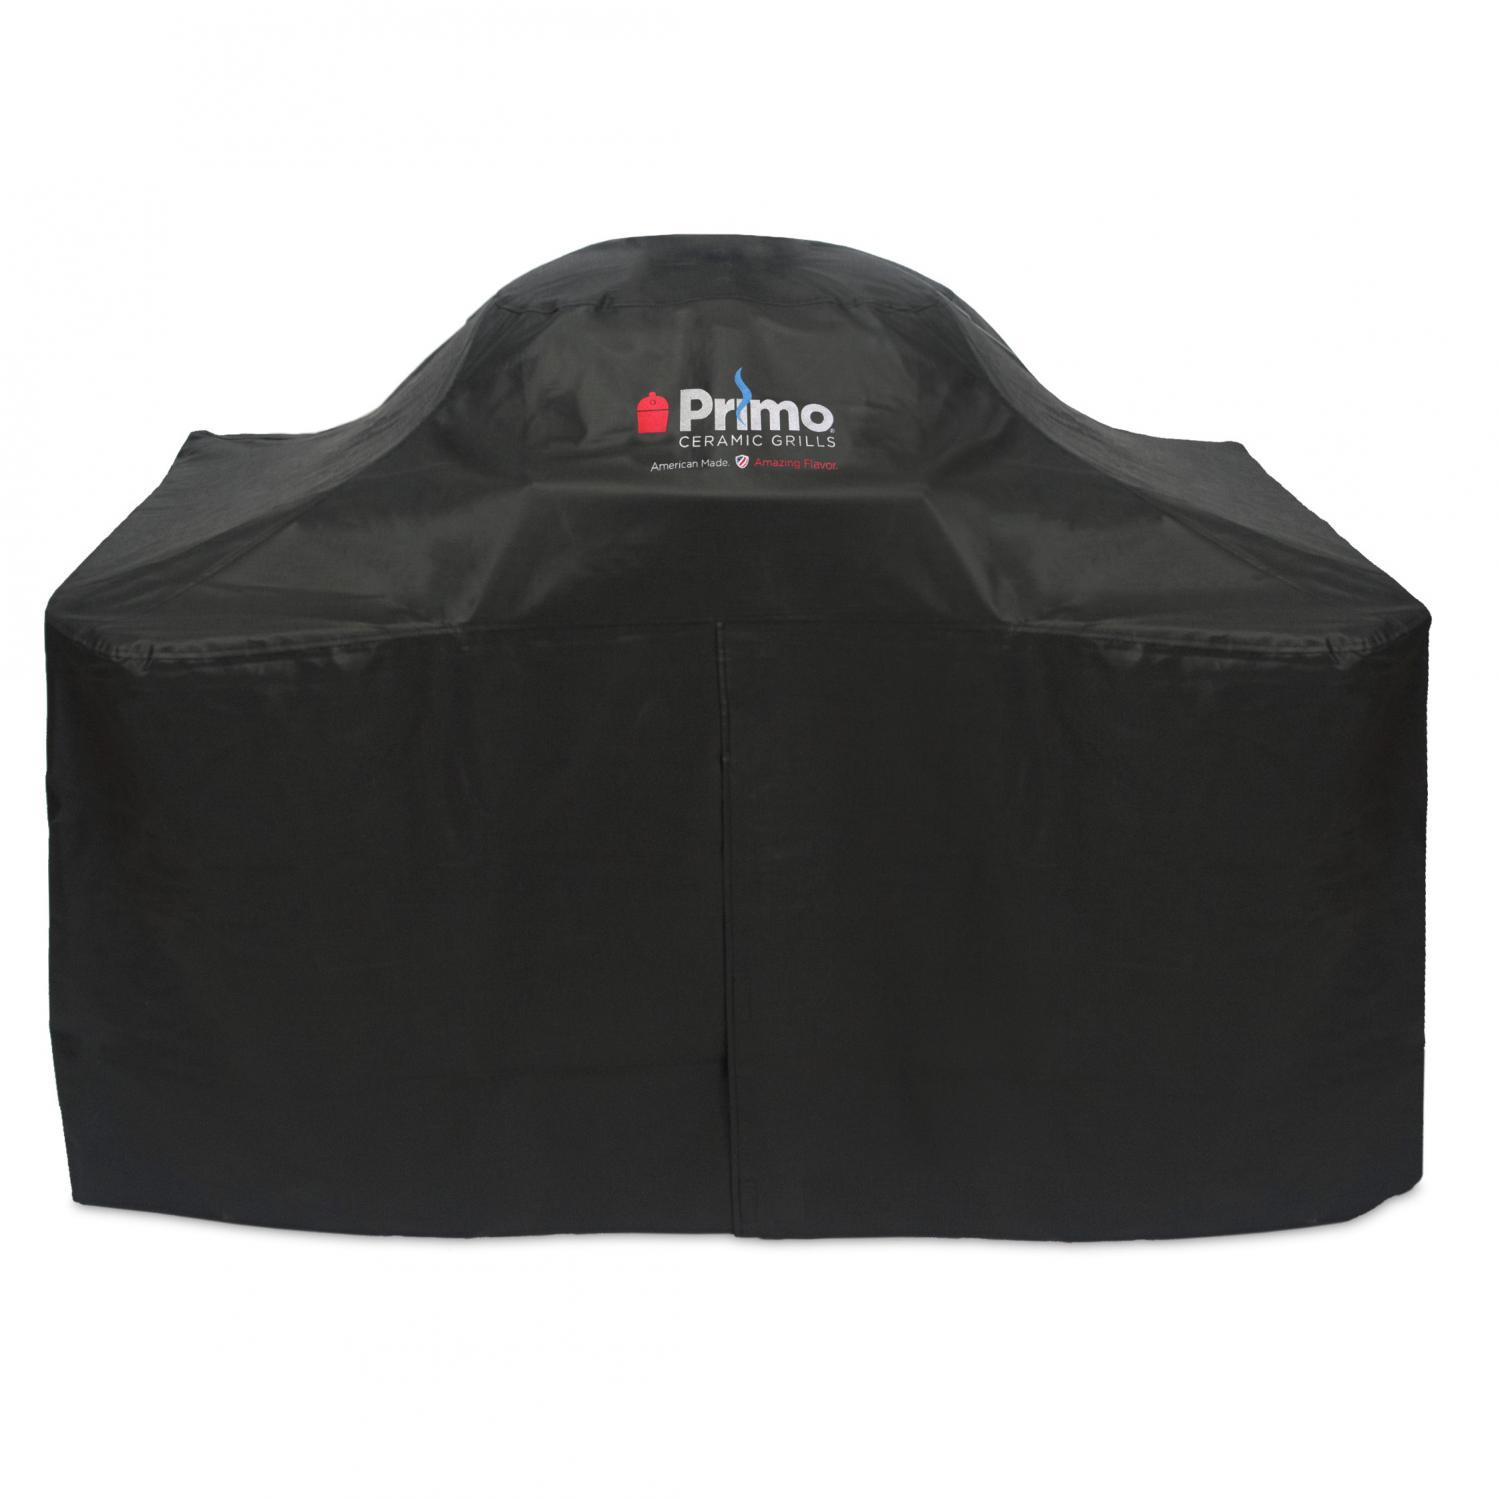 Primo Grills Primo Grills Accessories Primo Grills Grill Cover for Primo Oval G420C Gas Grill